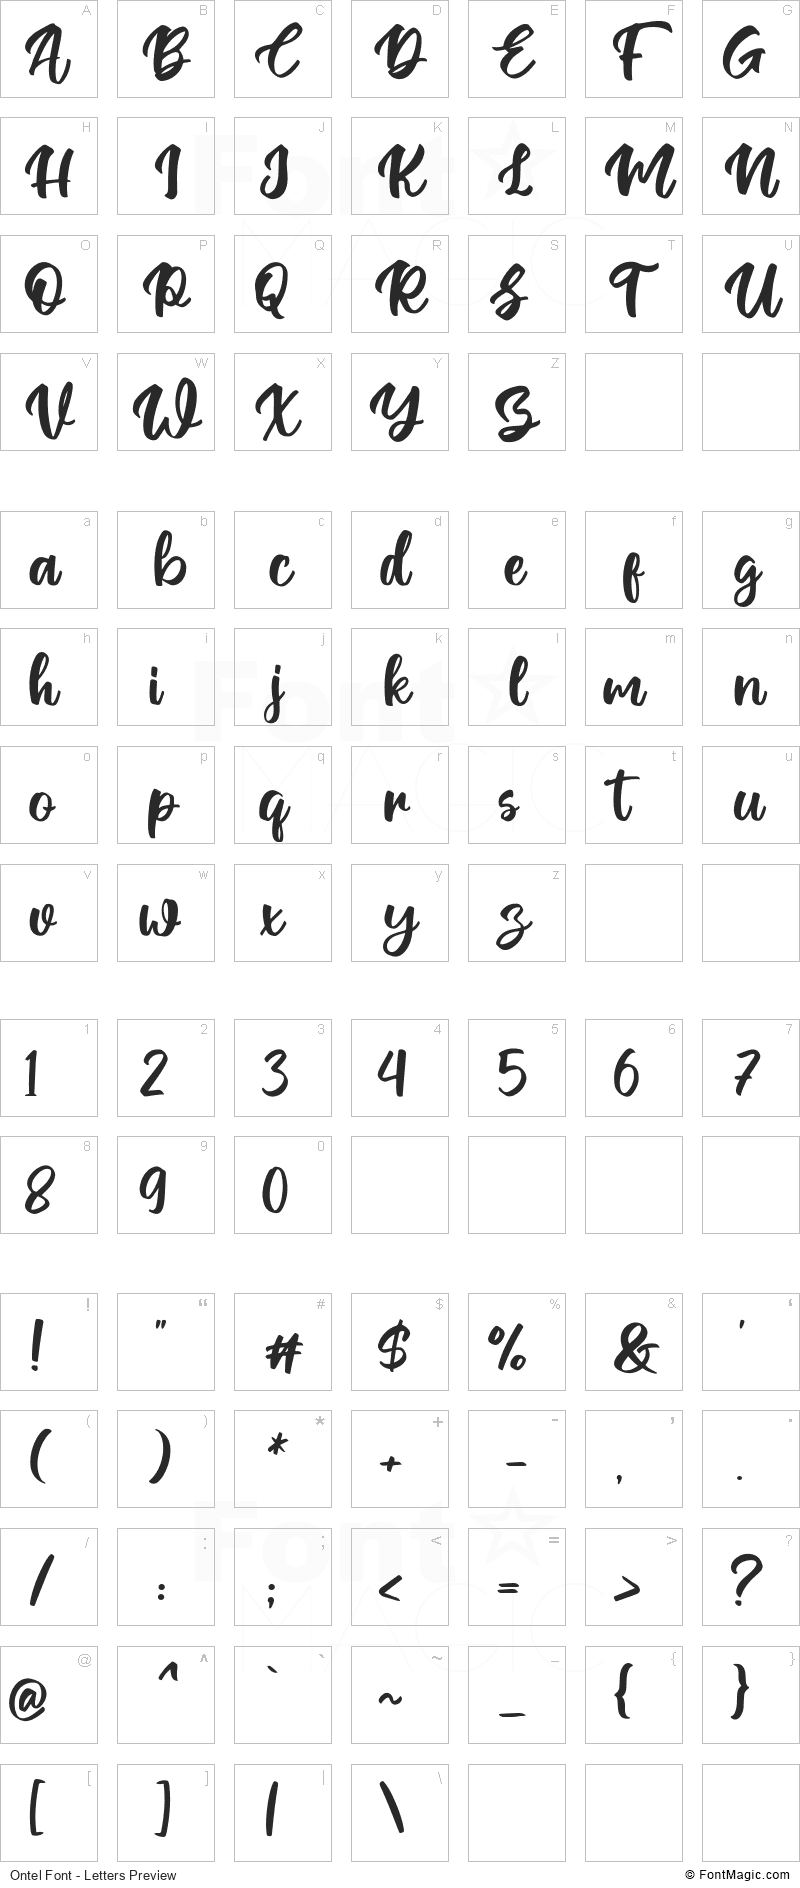 Ontel Font - All Latters Preview Chart